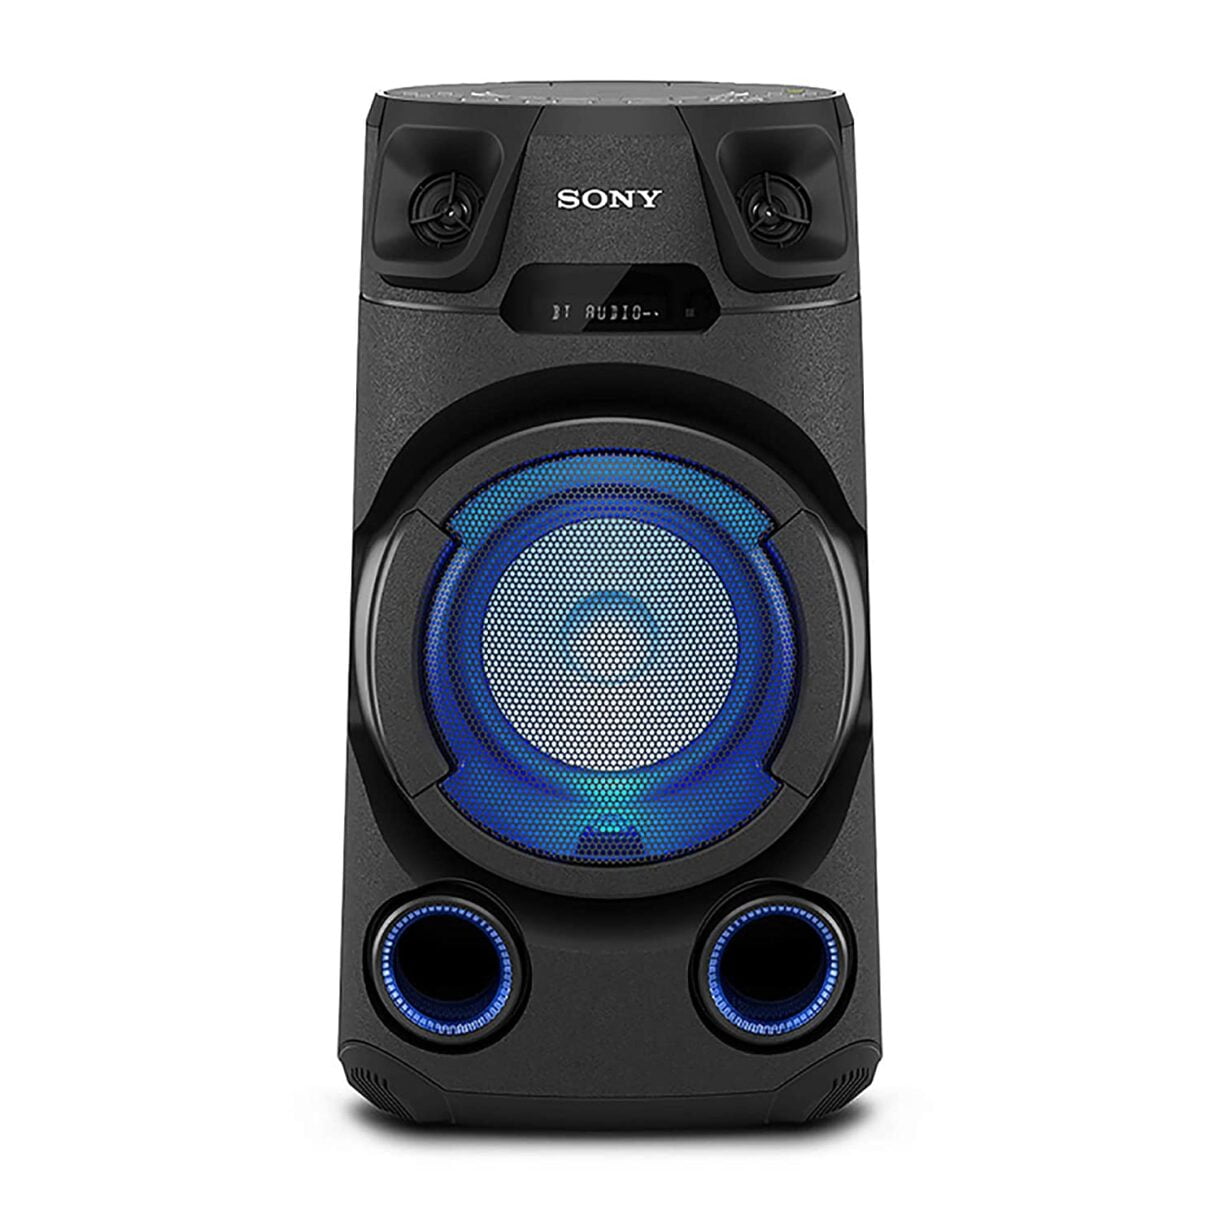 Sony MHC-V13 High Power Party Speaker with Bluetooth Technology